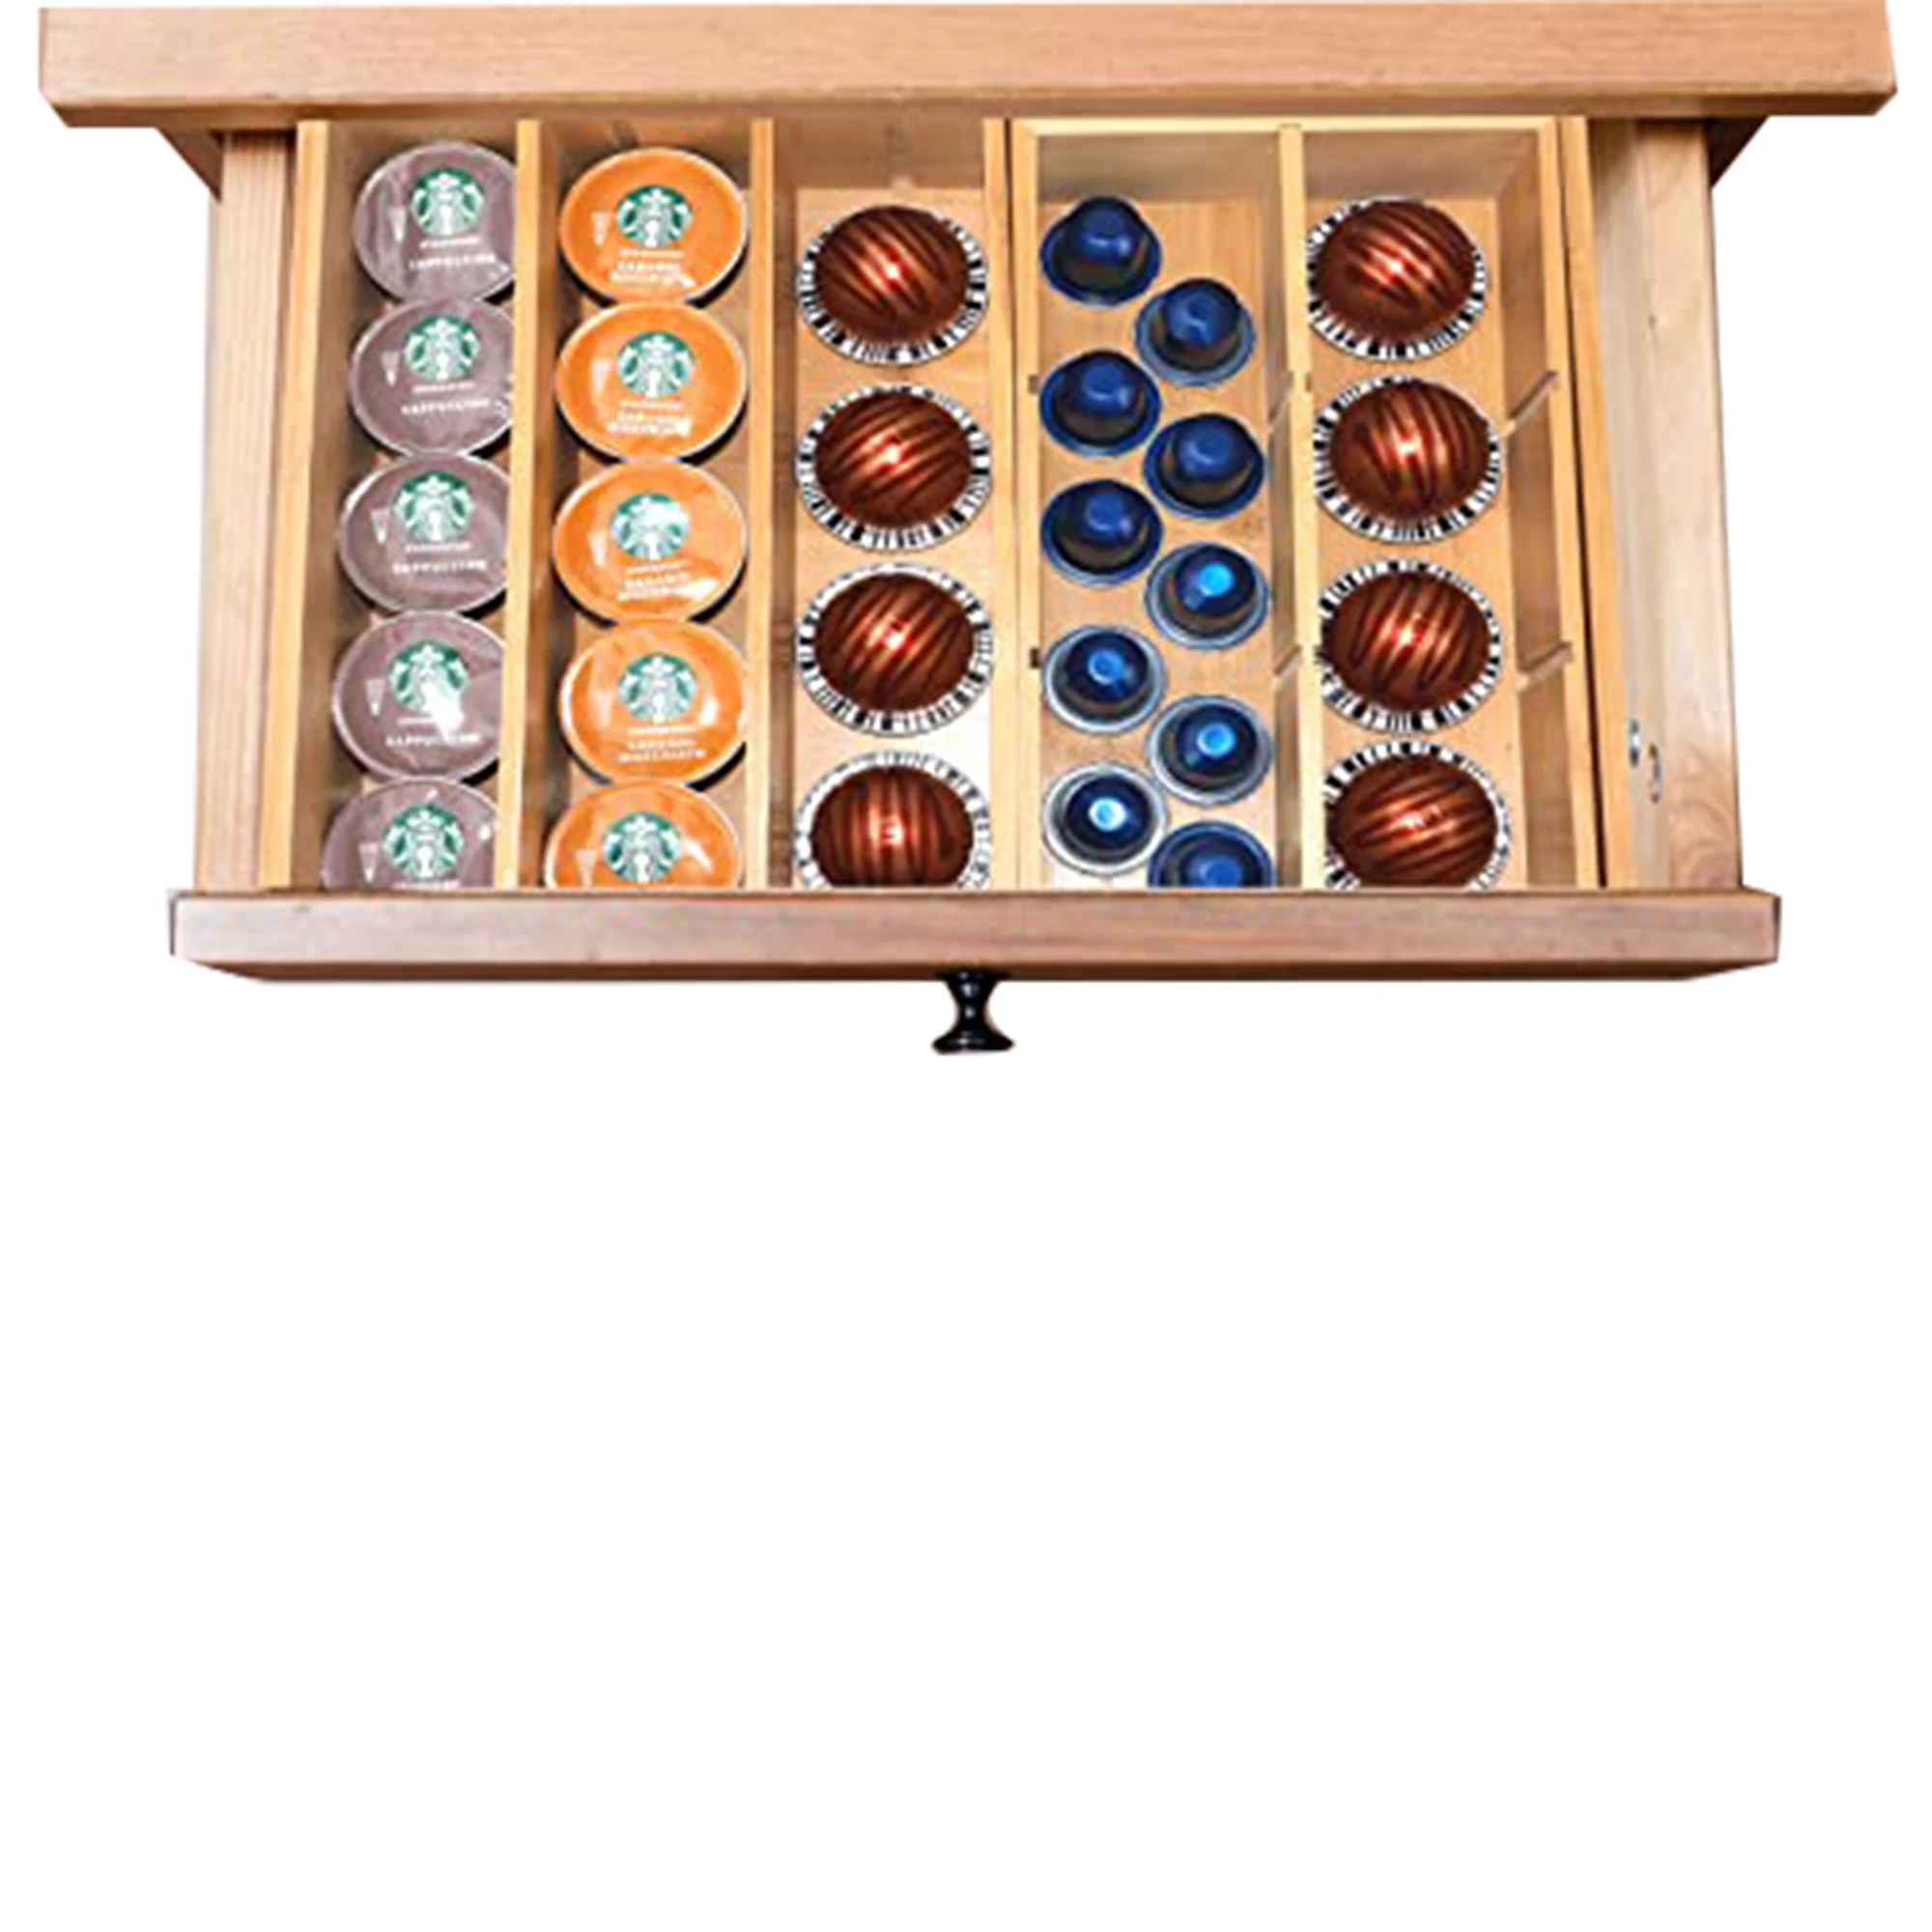 Wholesale  Kitchen Bamboo Holder Adjustable K Cup Storage and Tea Bag Organizer for Coffee Station